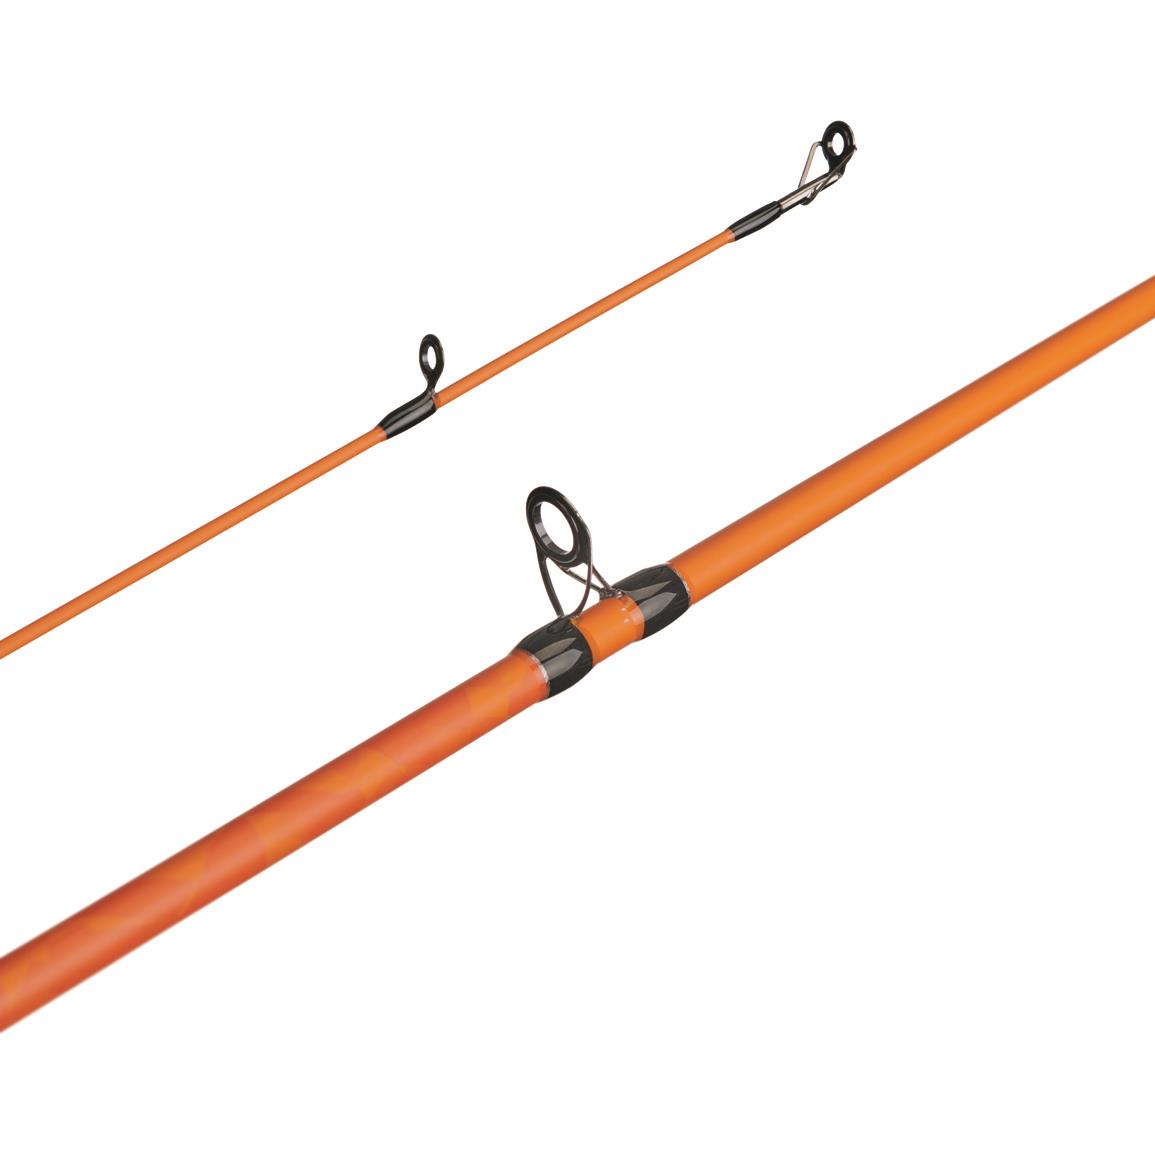 MACH 2 Baitcasting Combos - 732885, Casting Combos at Sportsman's Guide